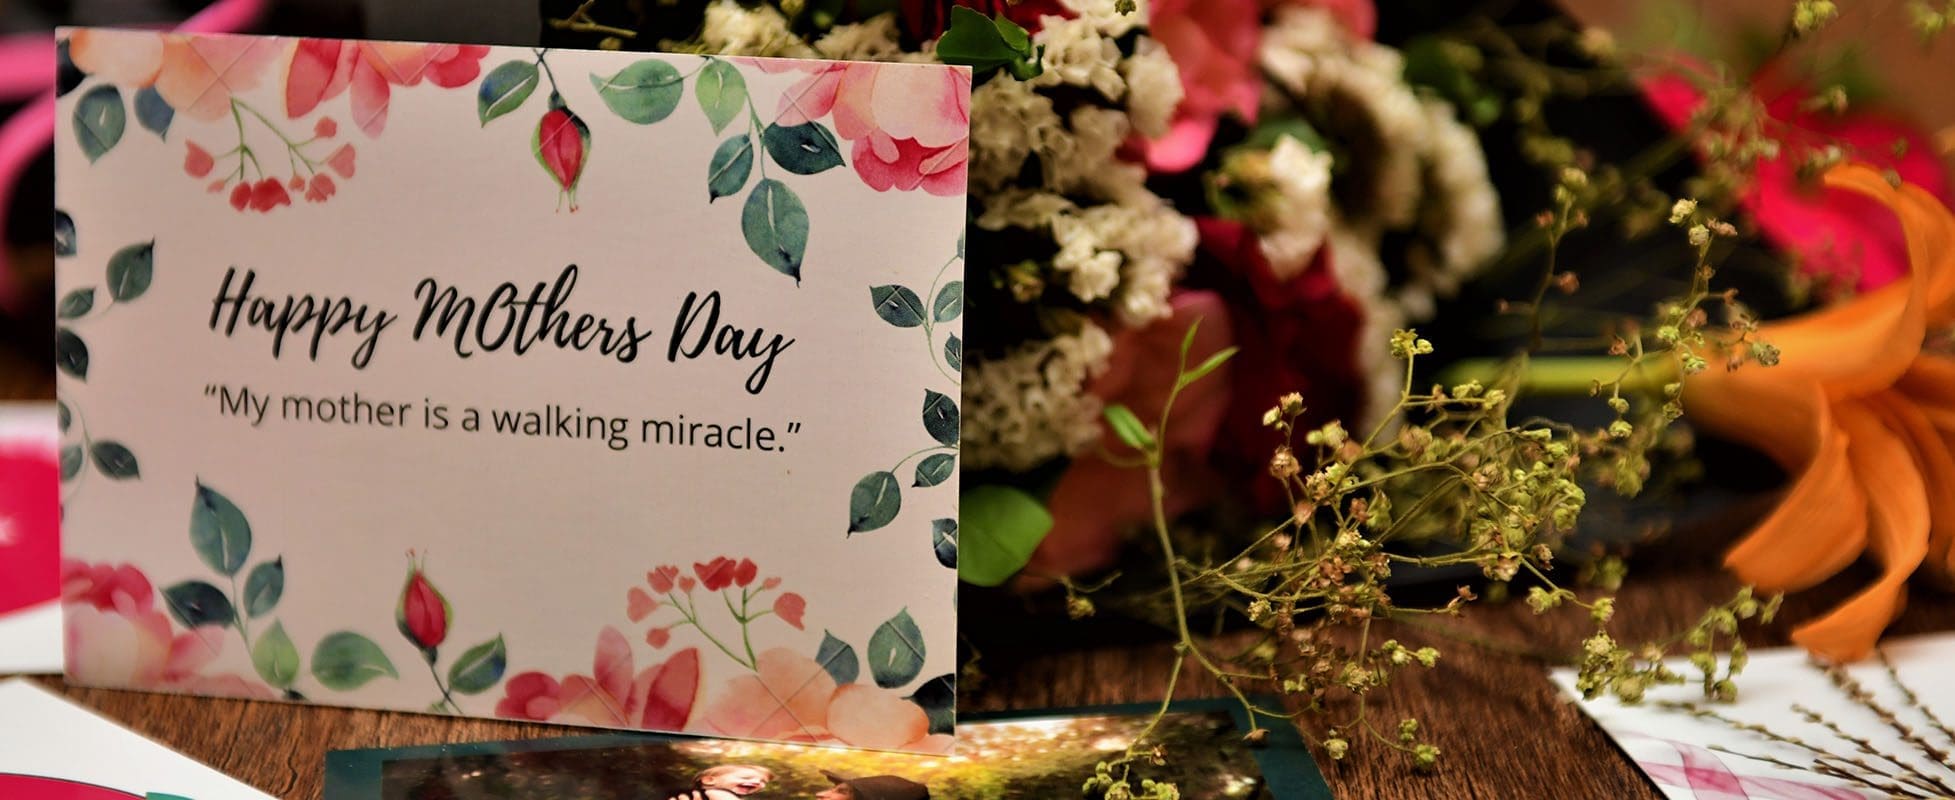 mothers day card wth gifts and flowers